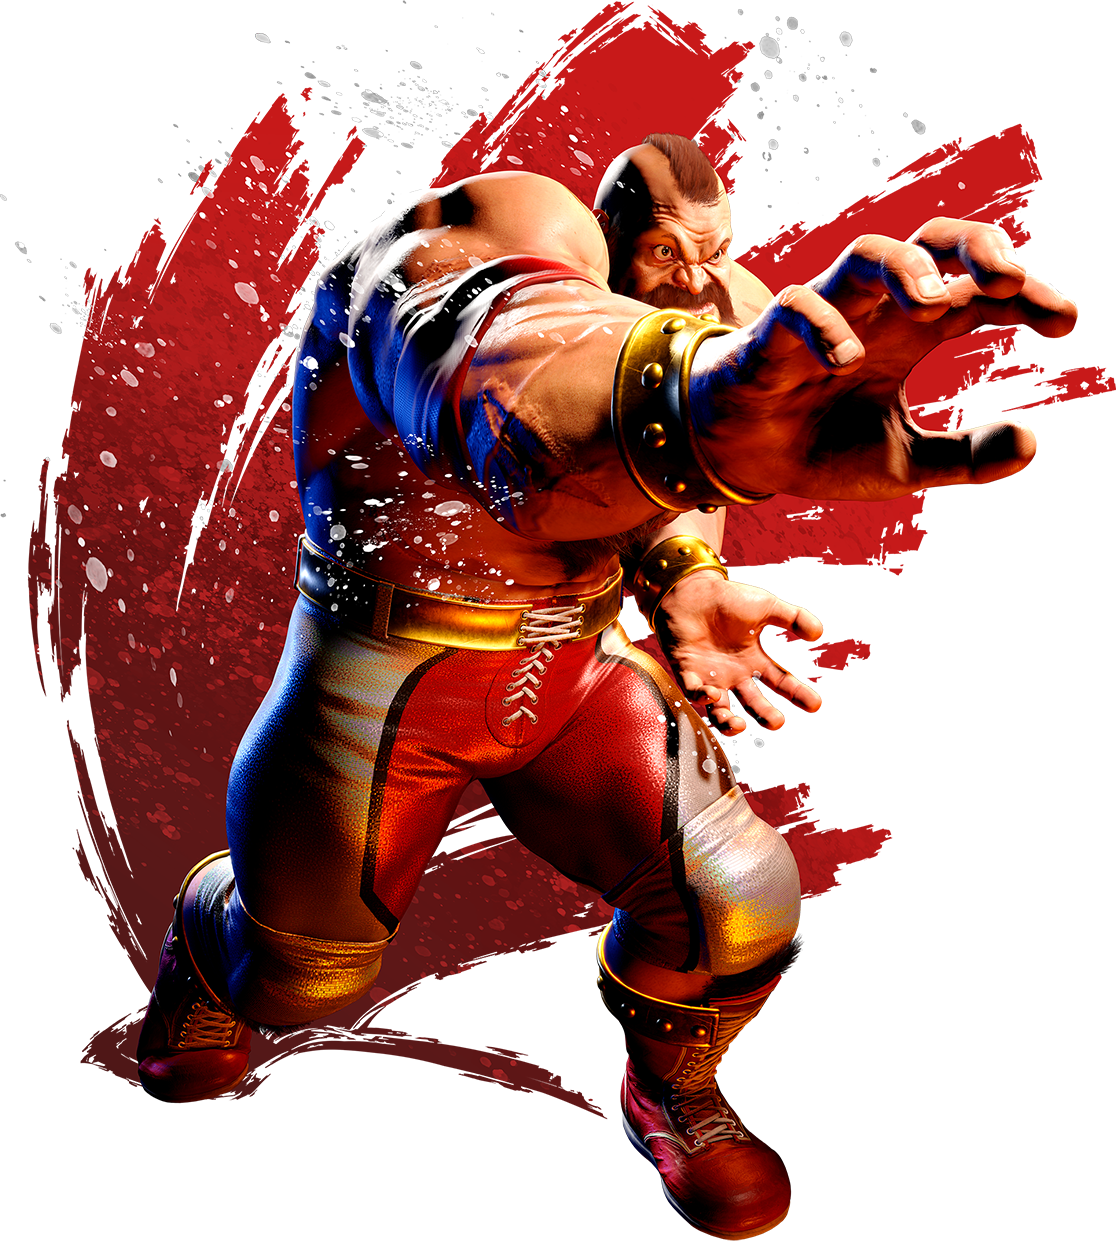 Street Fighter on X: Don't forget to add Street Fighter V to your